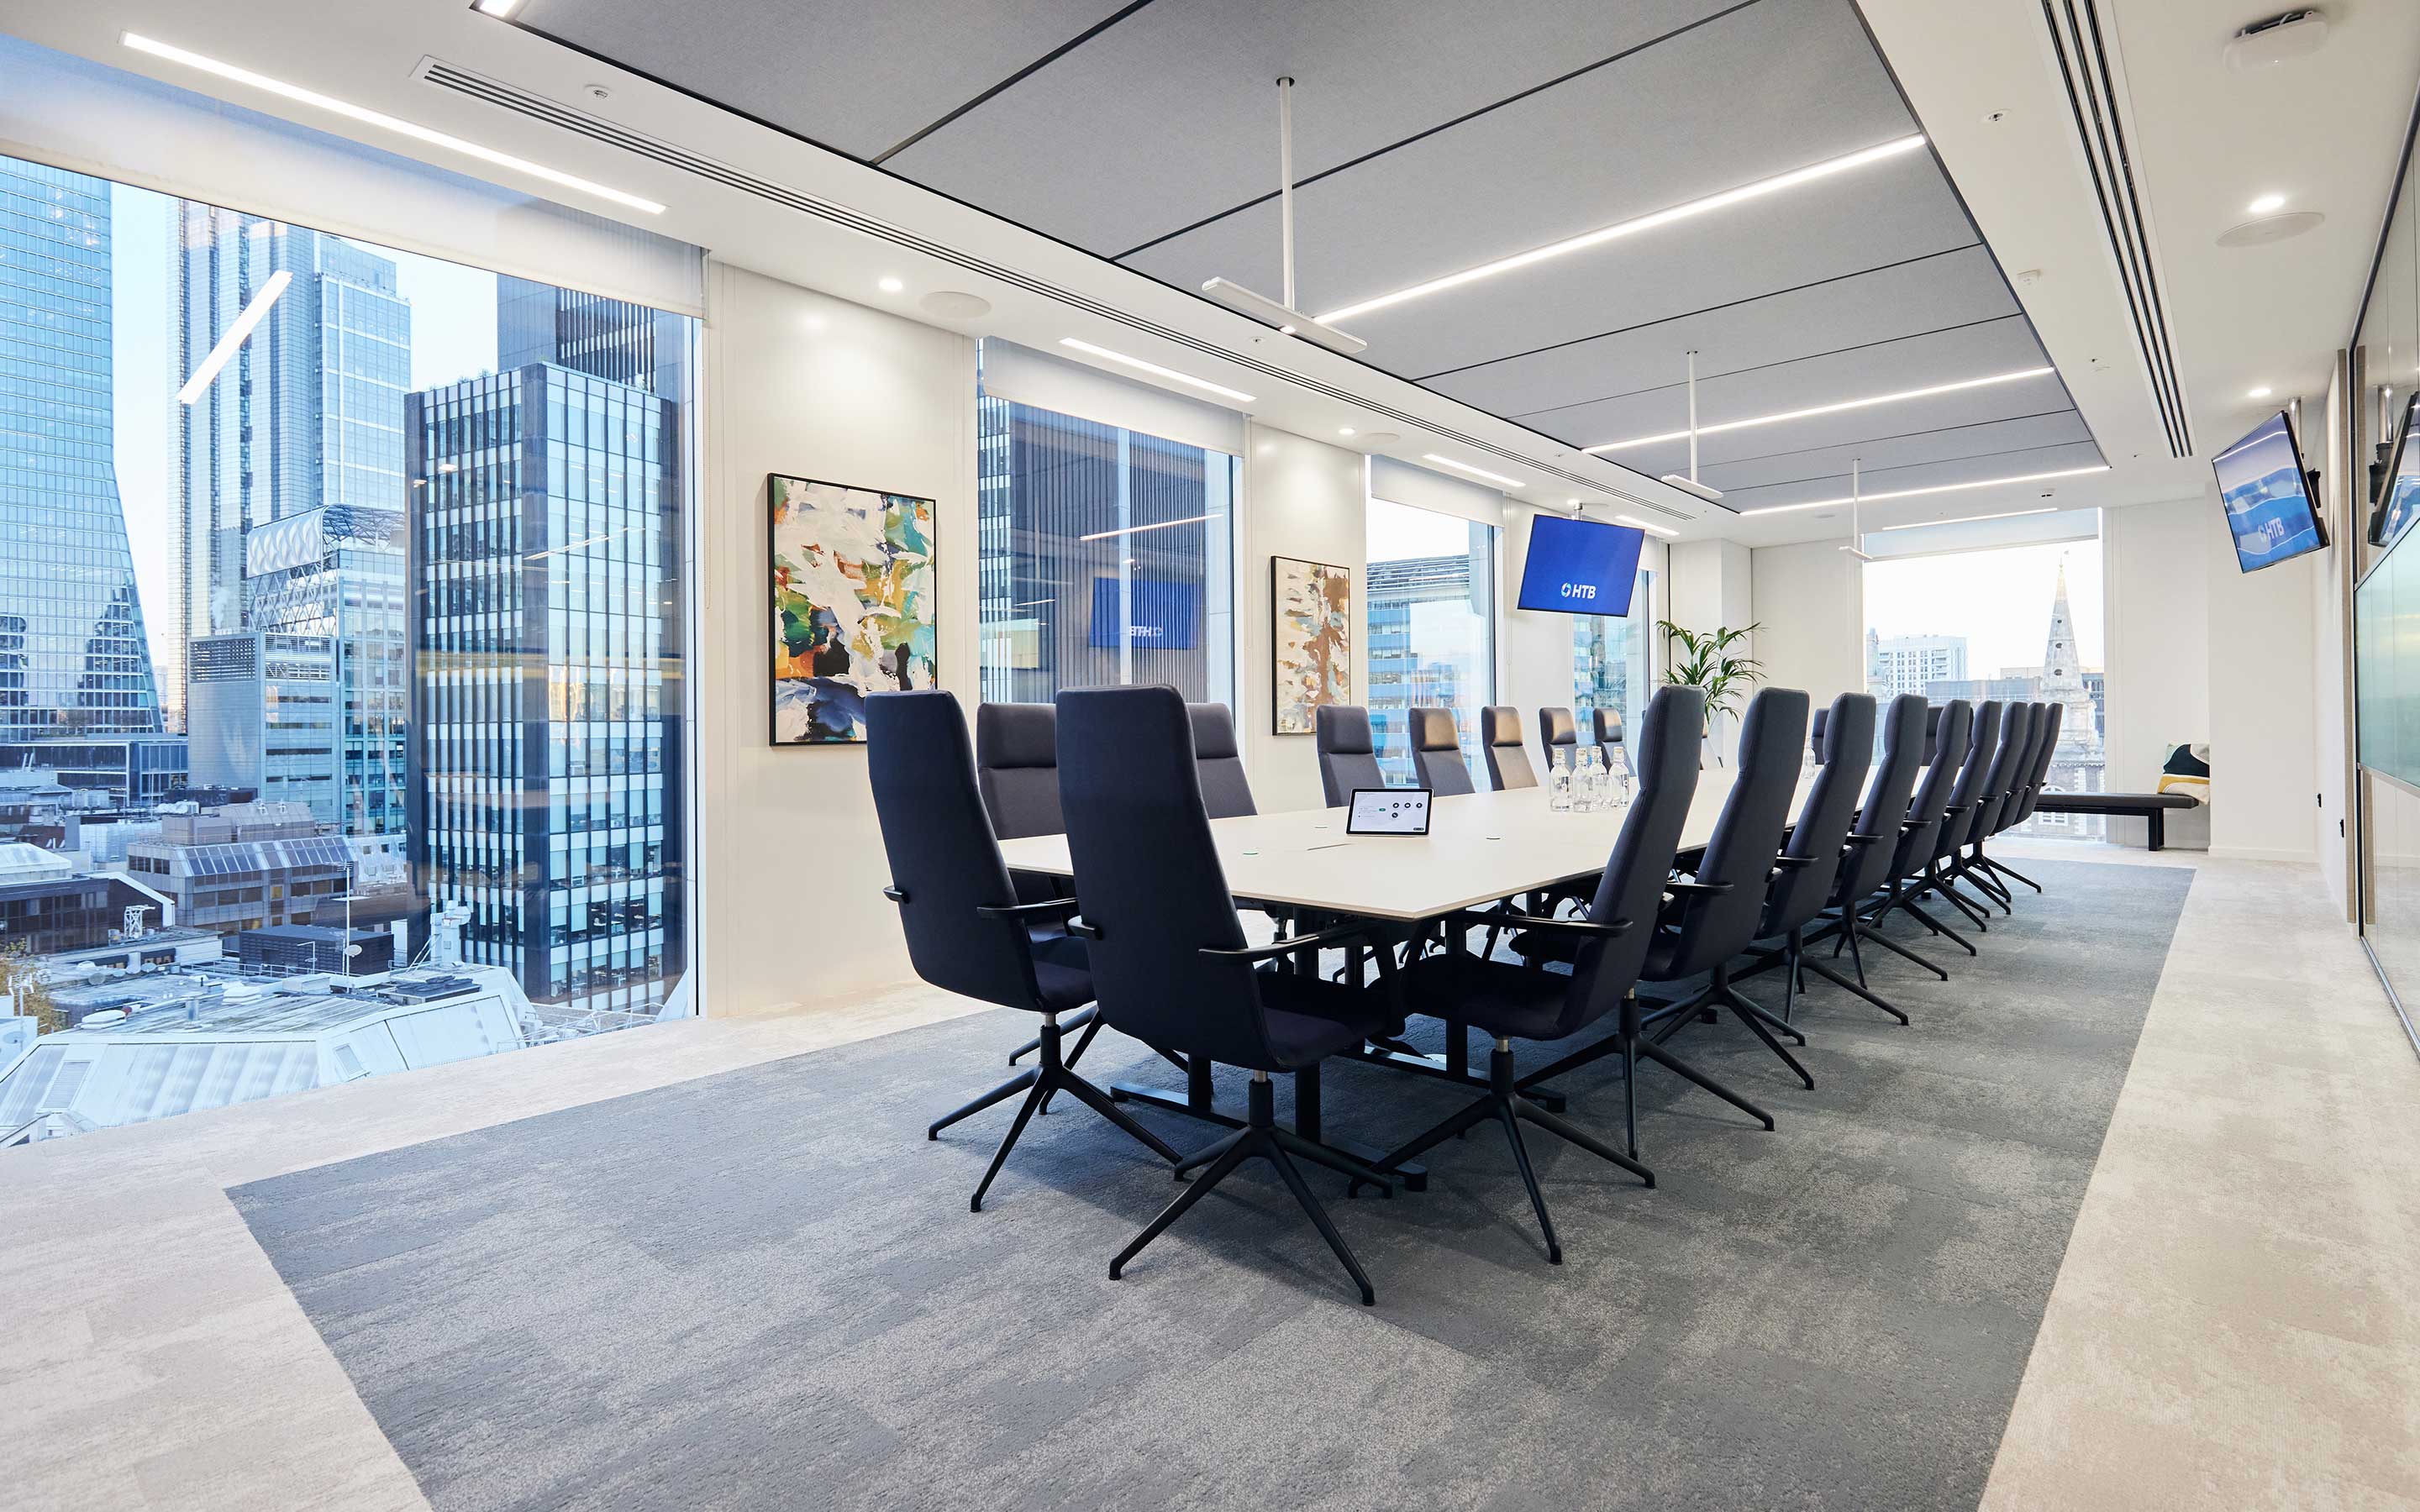 A sleek conference room and boardroom table with acoustic panels, a plush carpet, and lovely city views